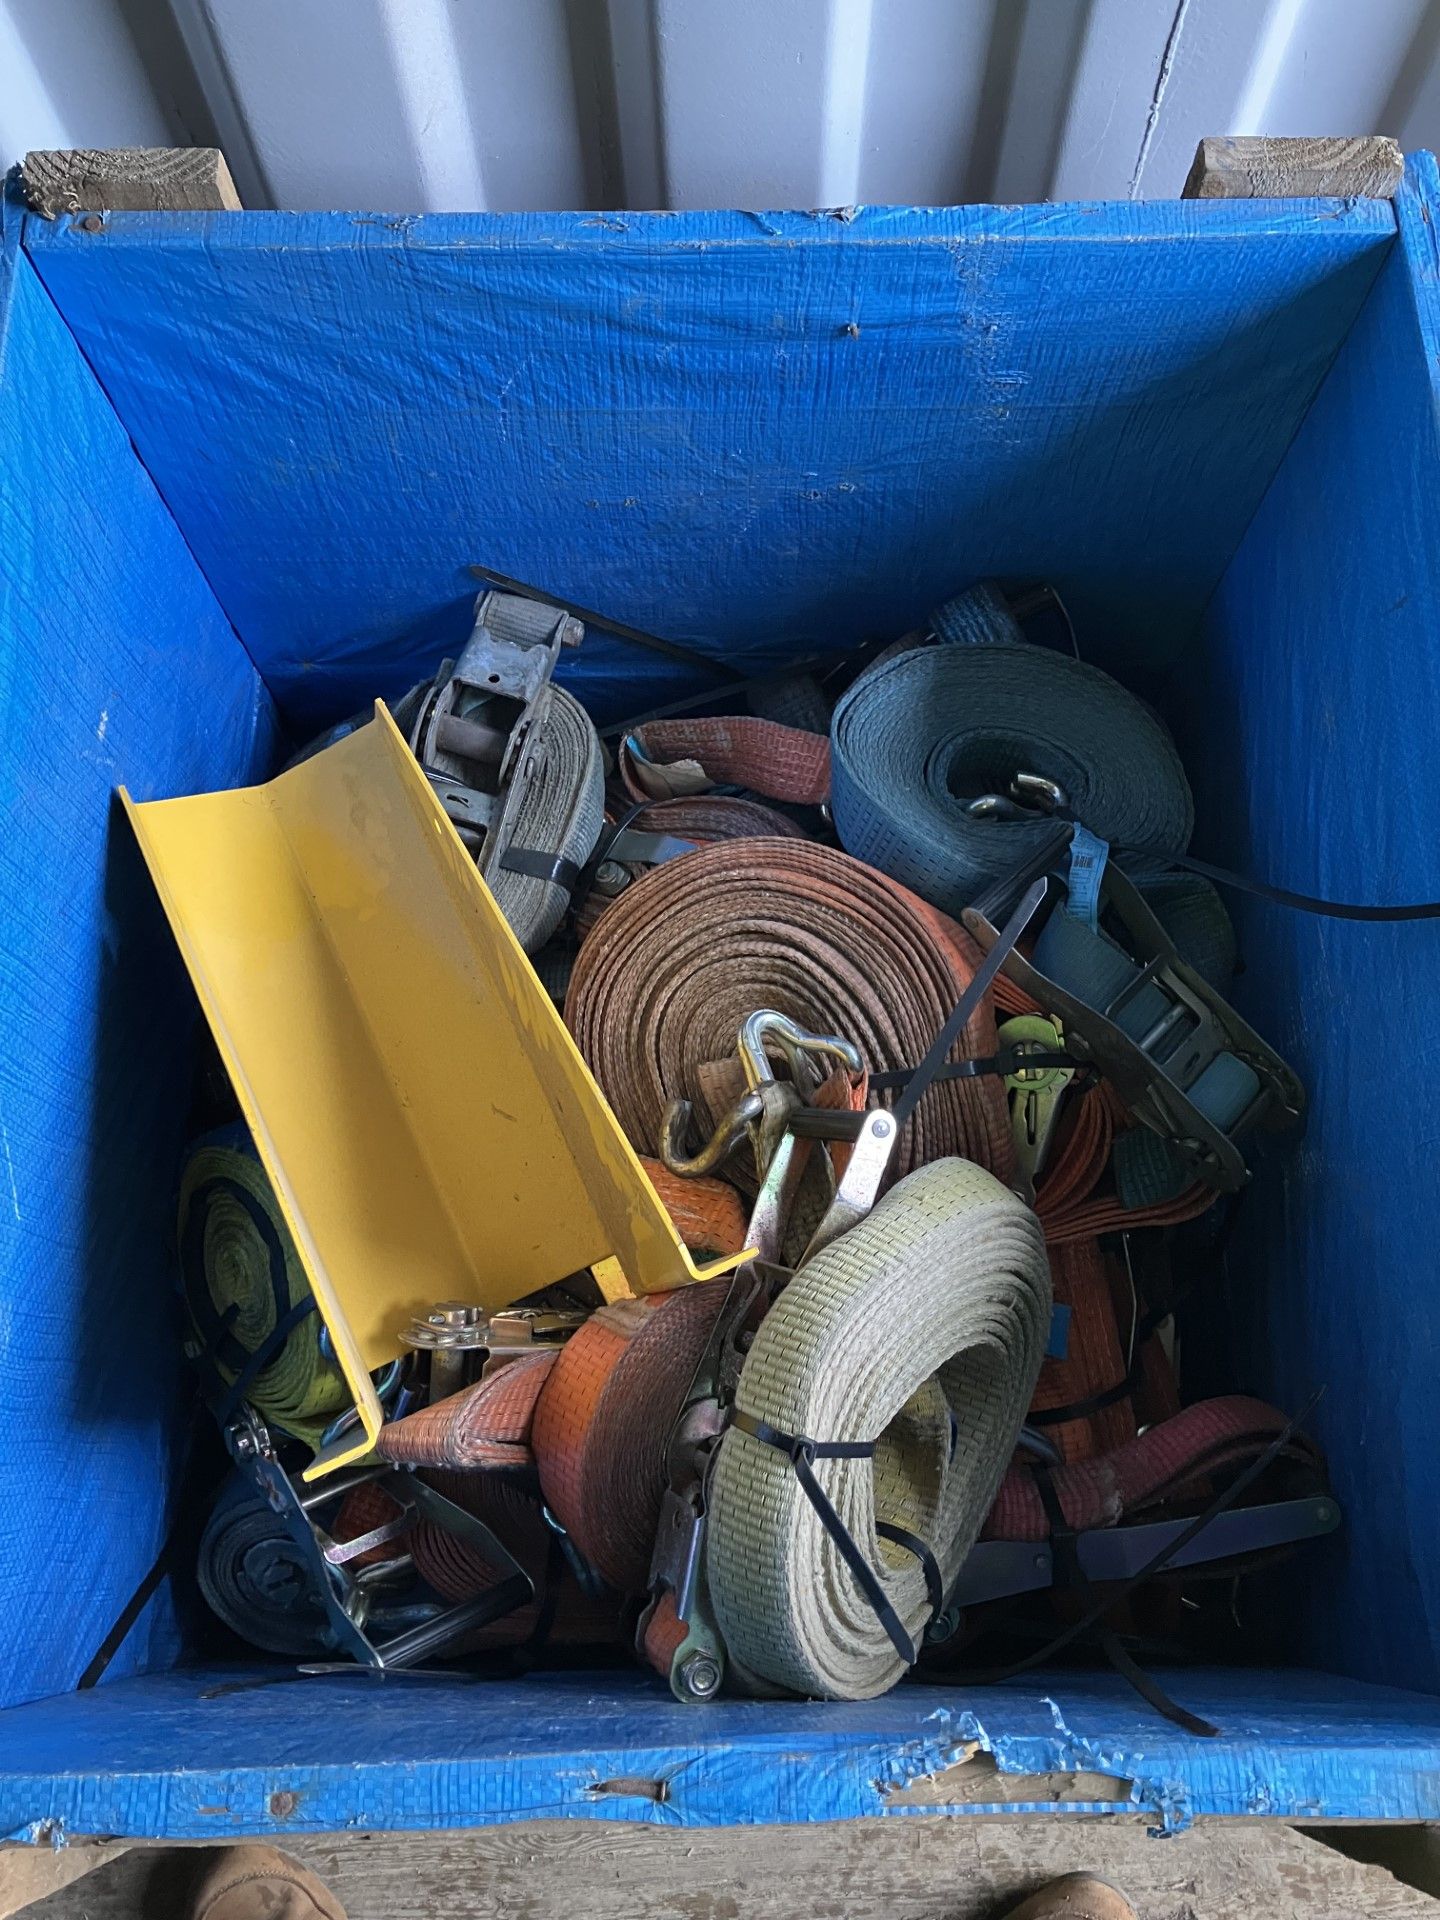 Crate full of ratchet straps (different lengths) - Image 2 of 2